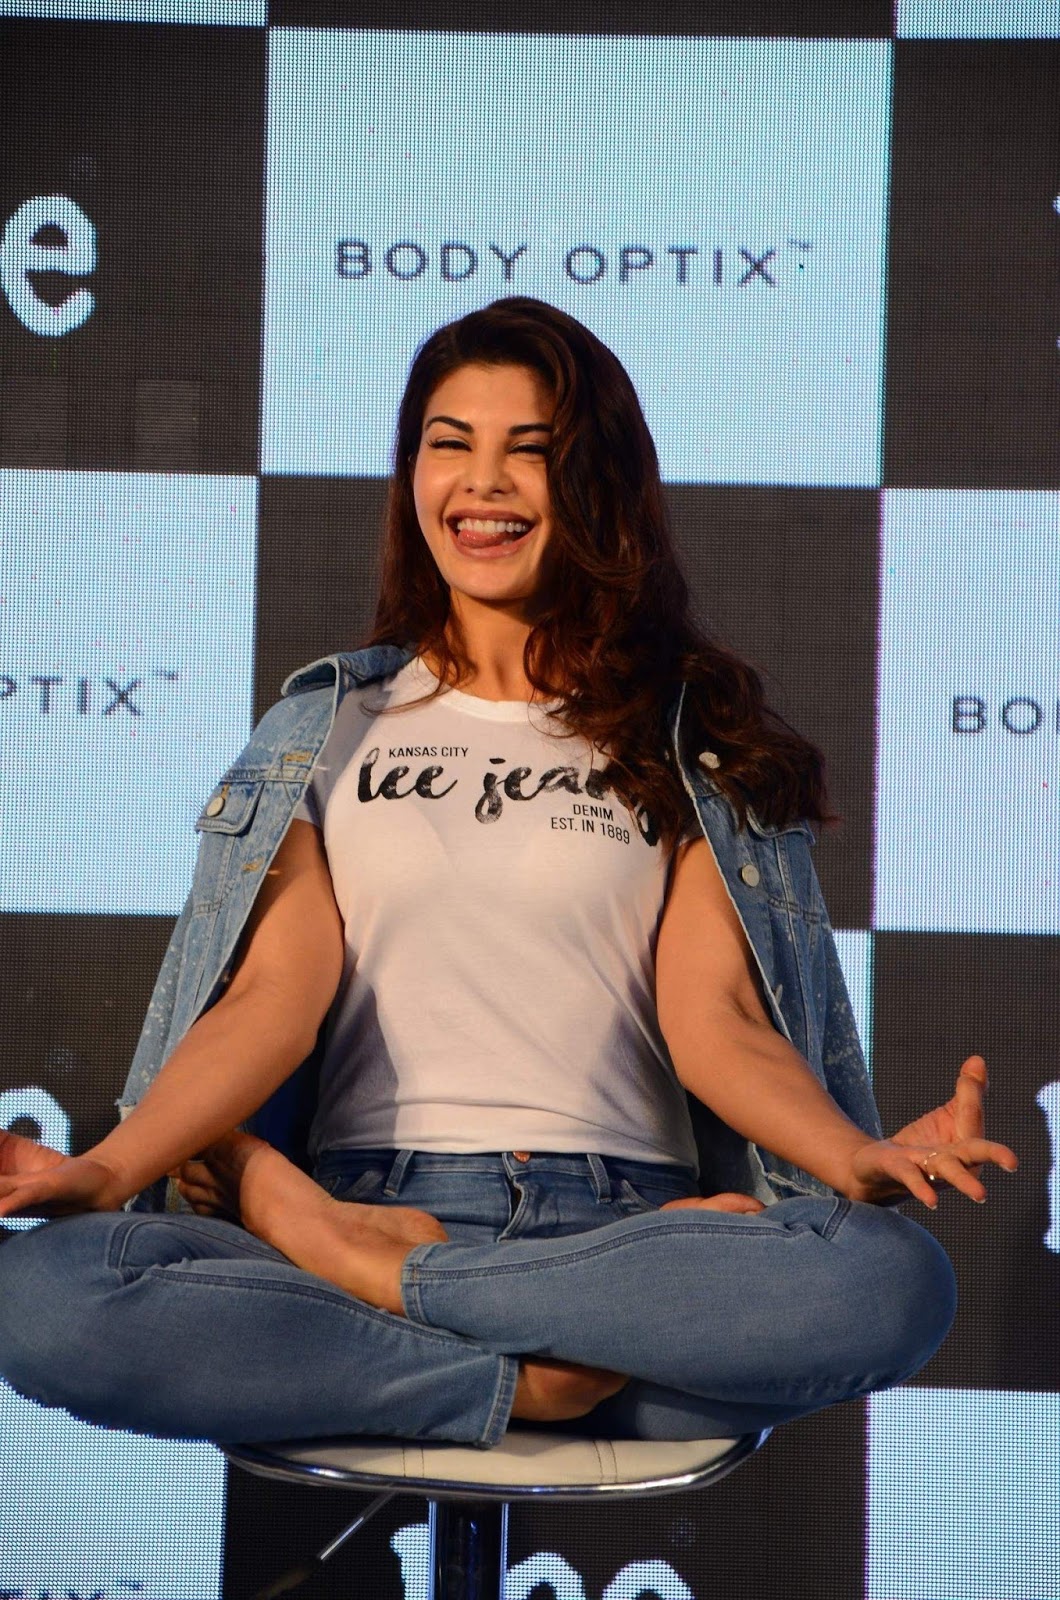 Jacqueline Fernandez Puts Her Stunning Figure On Show As She Launches Lee Denim Stores In India As Brand Ambassador